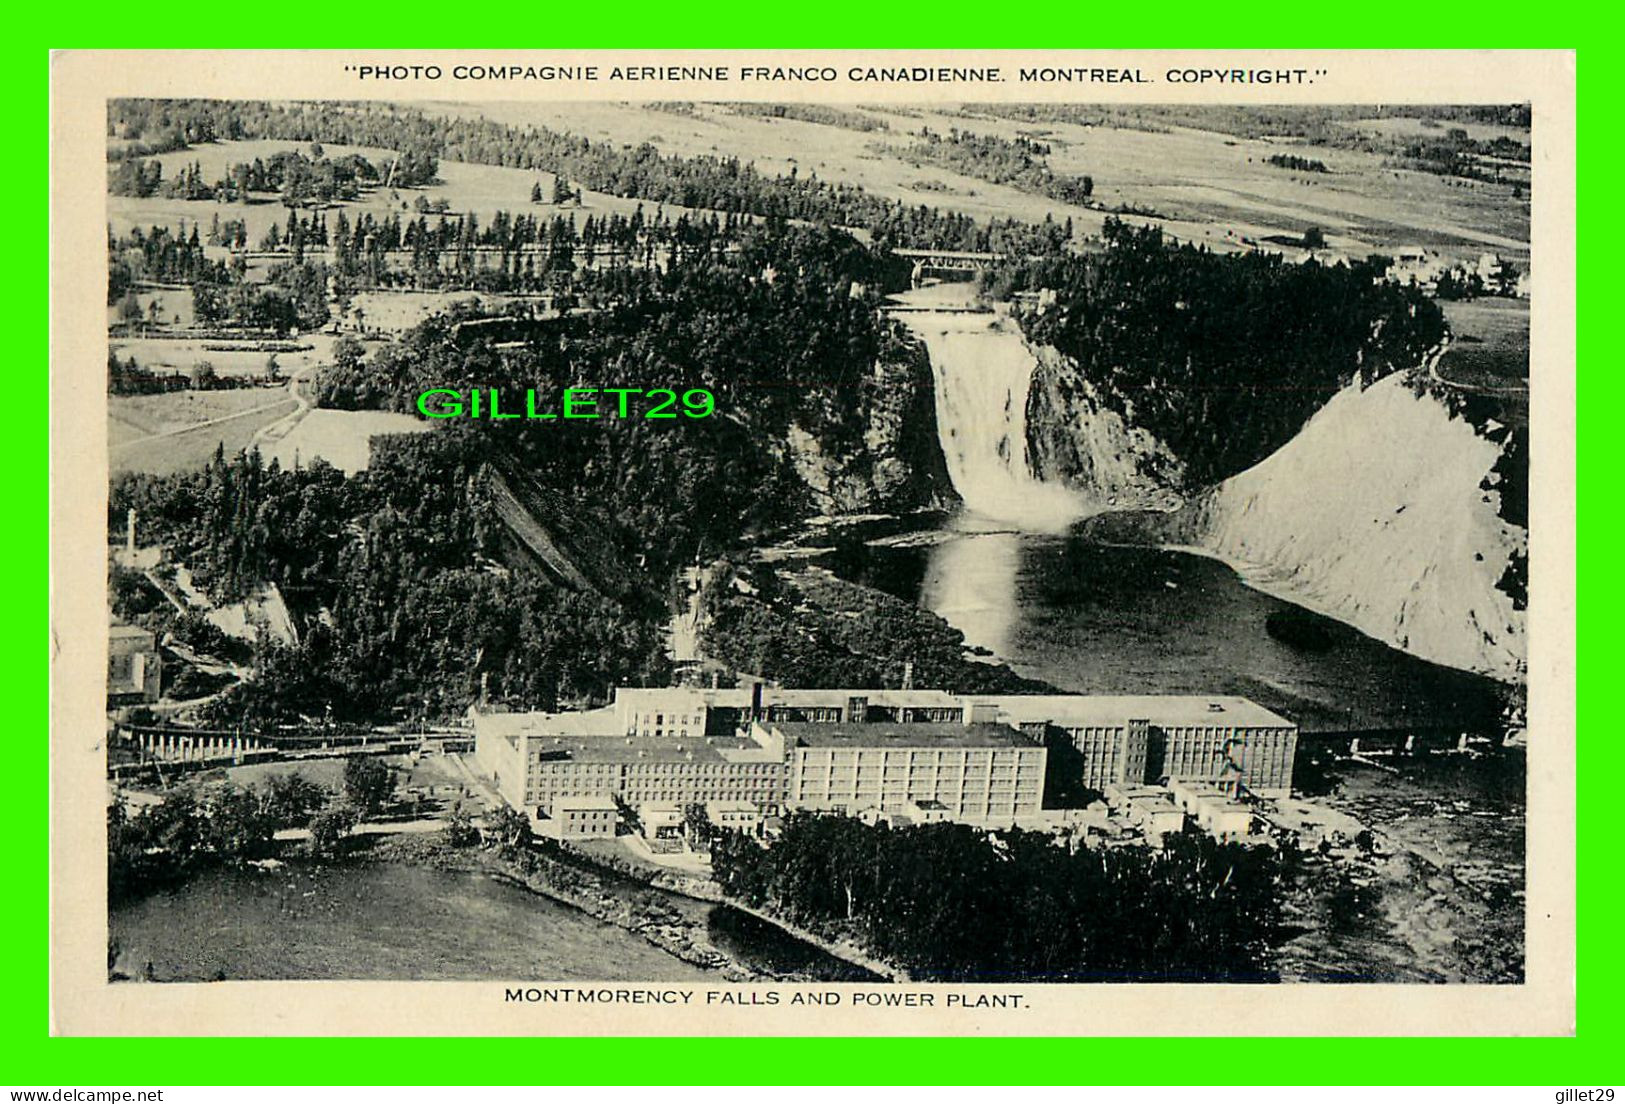 MONTMORENCY, QUÉBEC - MONTMORENCY FALLS AND POWER PLANT - WRITTEN IN 1931 - PUB. BY S.J. HAYWARD - - Montmorency Falls